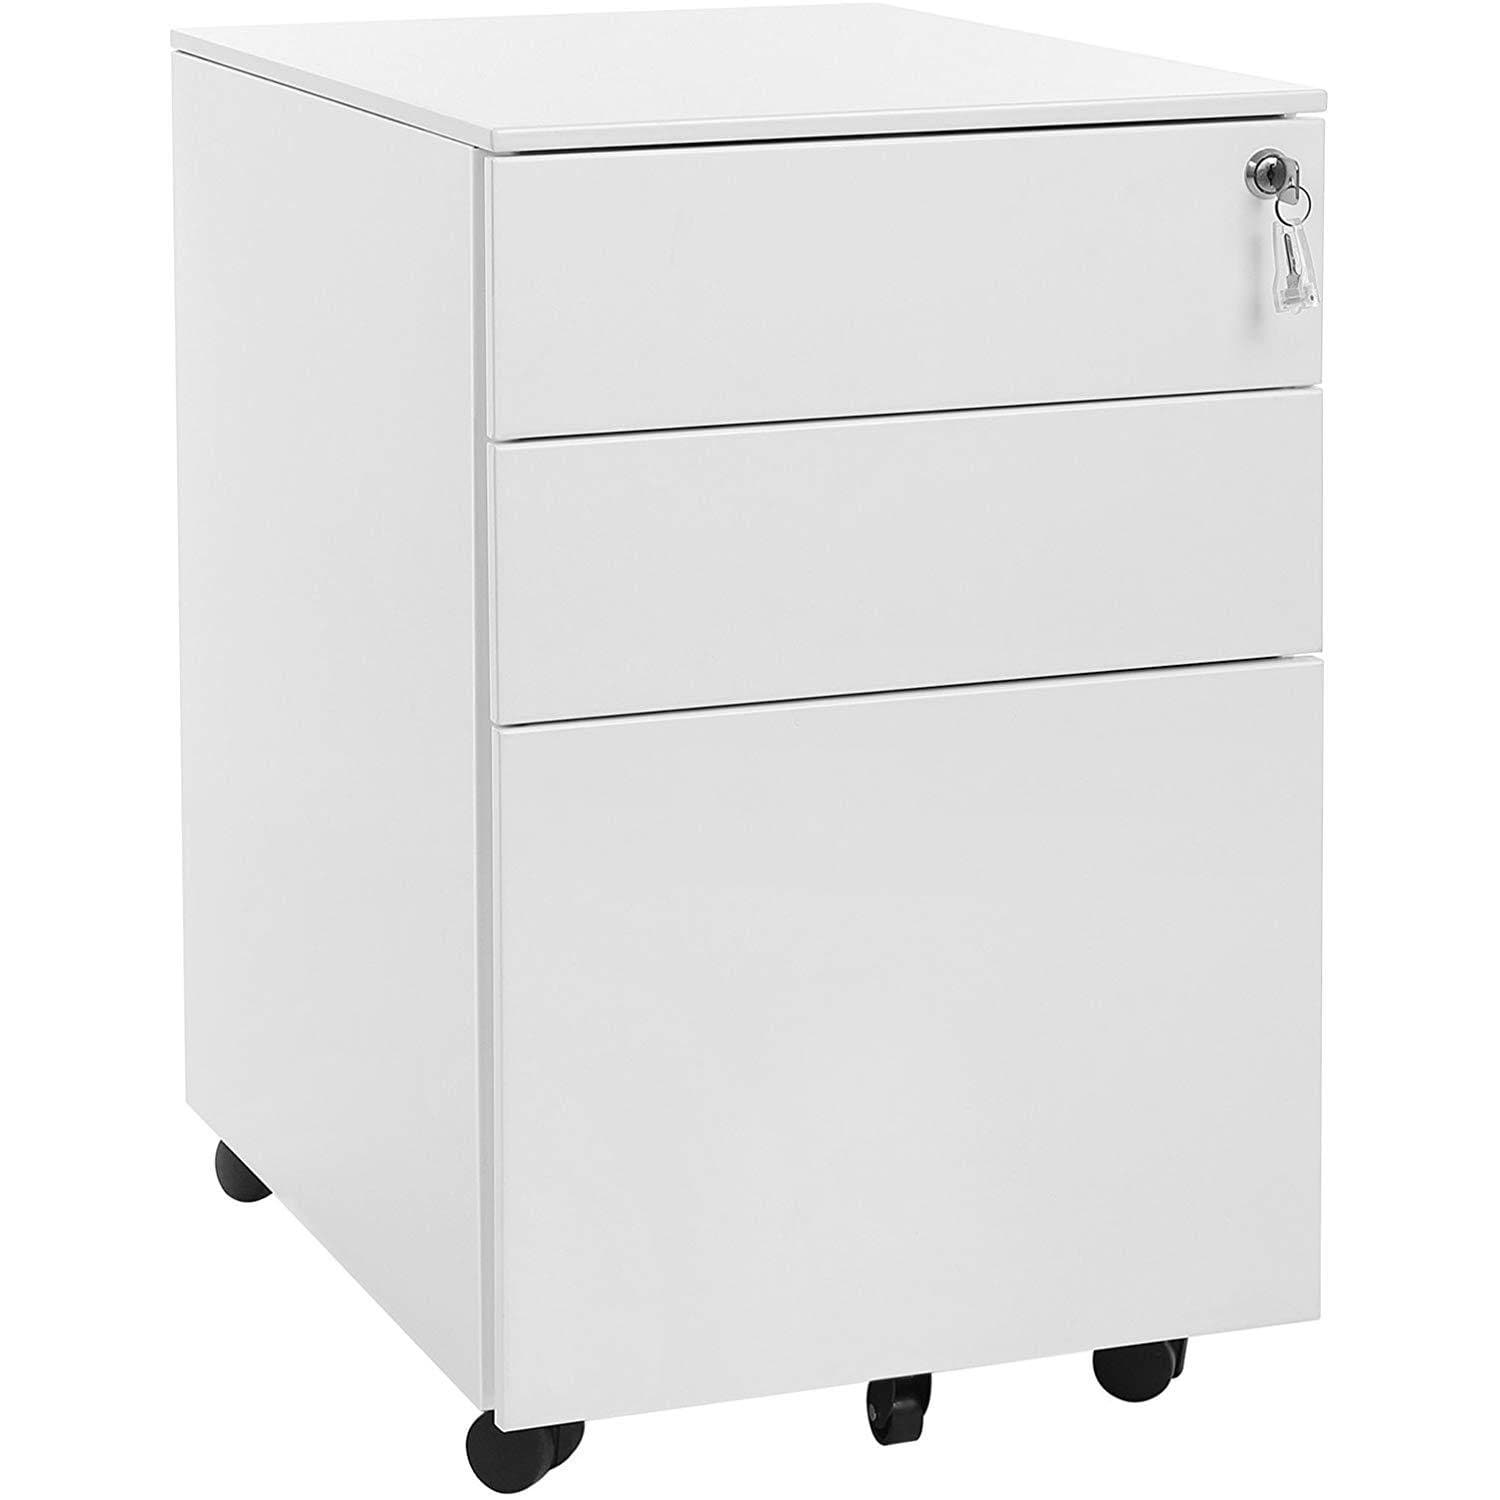 Nancy's Brookdale Drawer Unit White - Drawer Unit Desk - Rolling Container - Drawer Units 52 x 39 x 60 cm